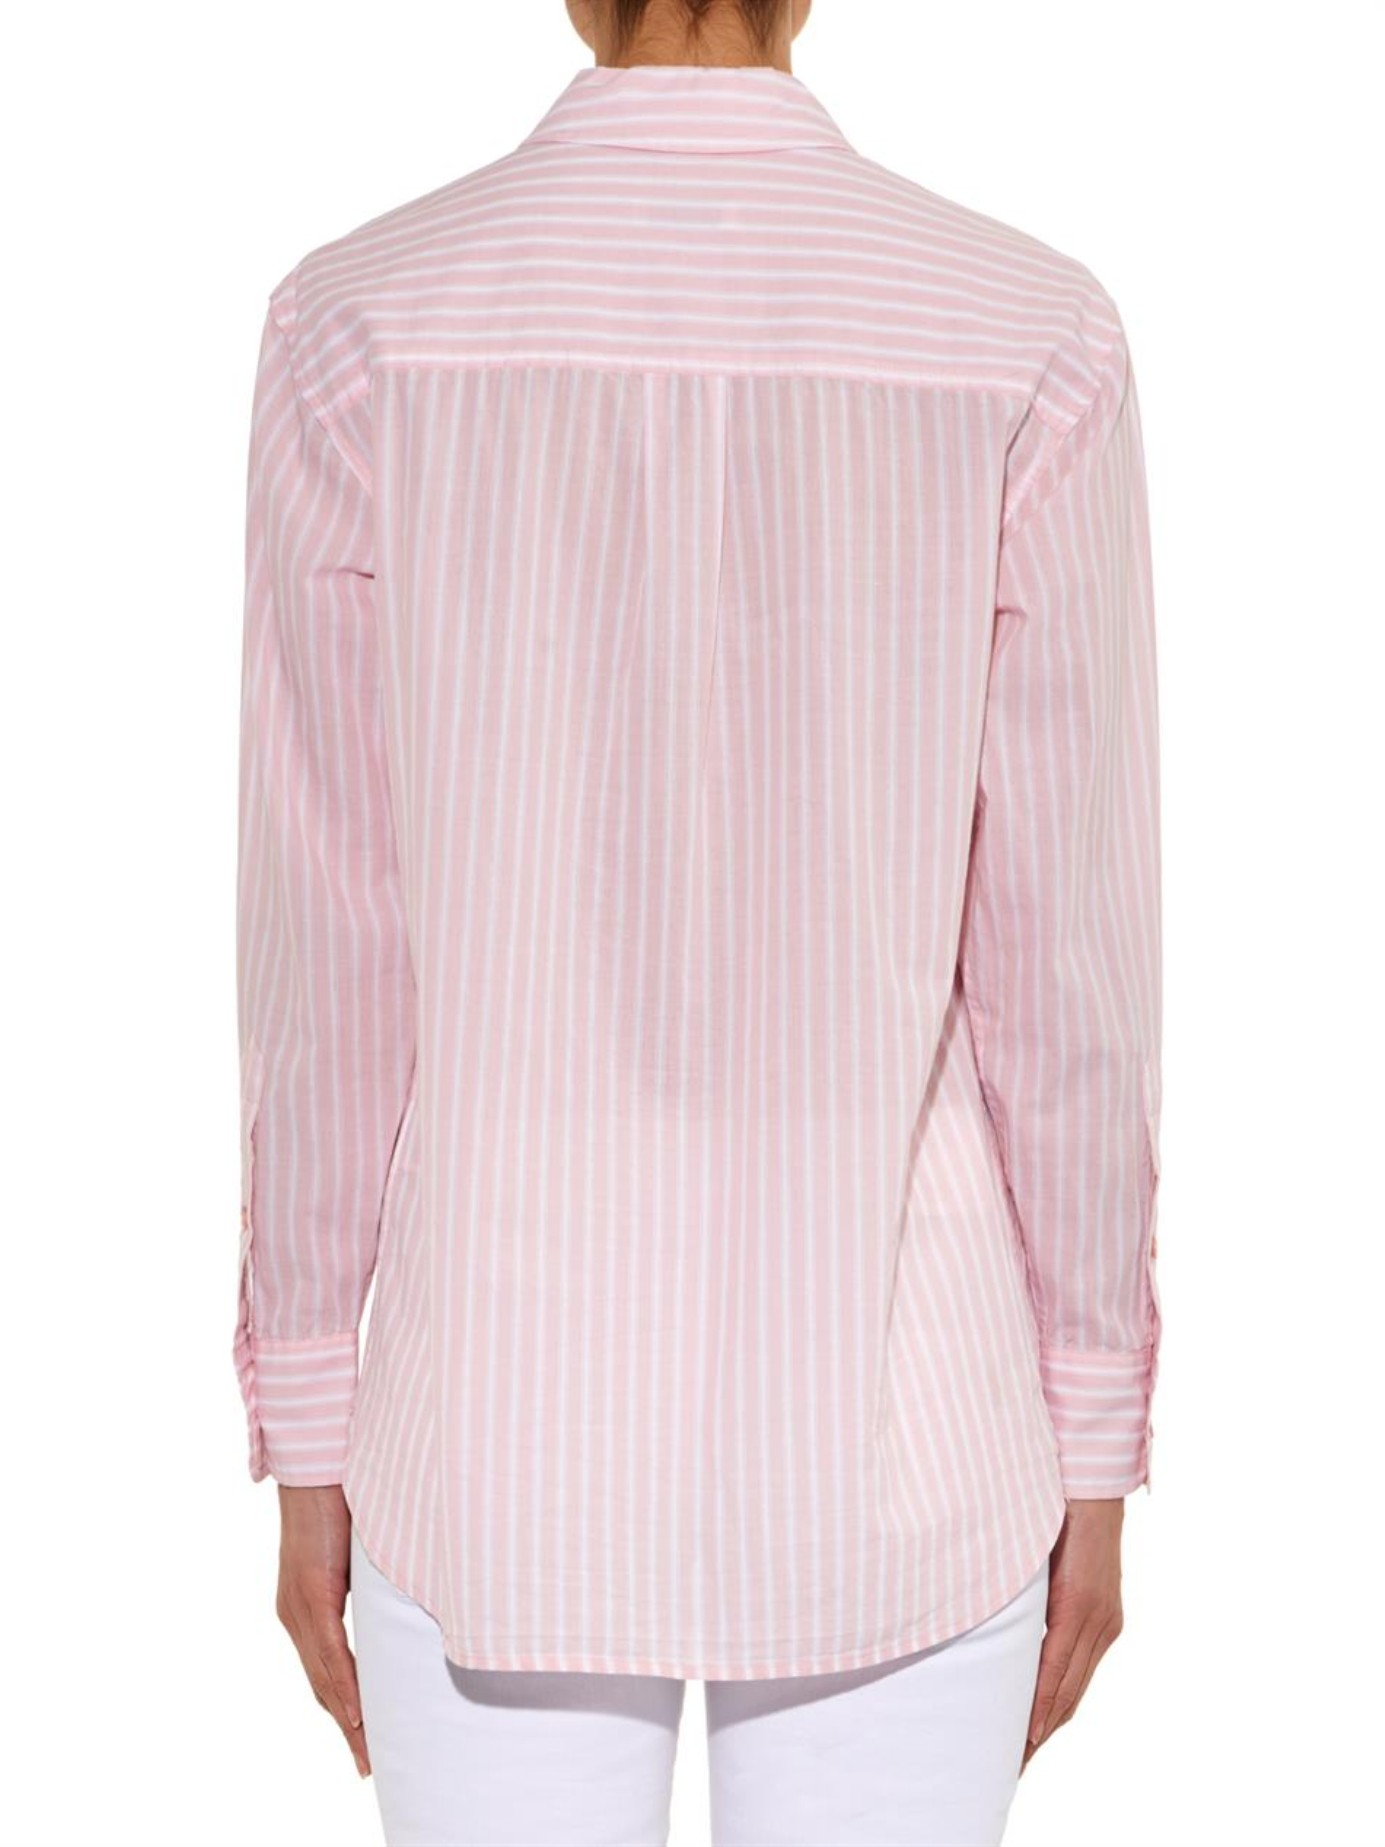 Lyst Equipment Striped Cotton Shirt In Pink